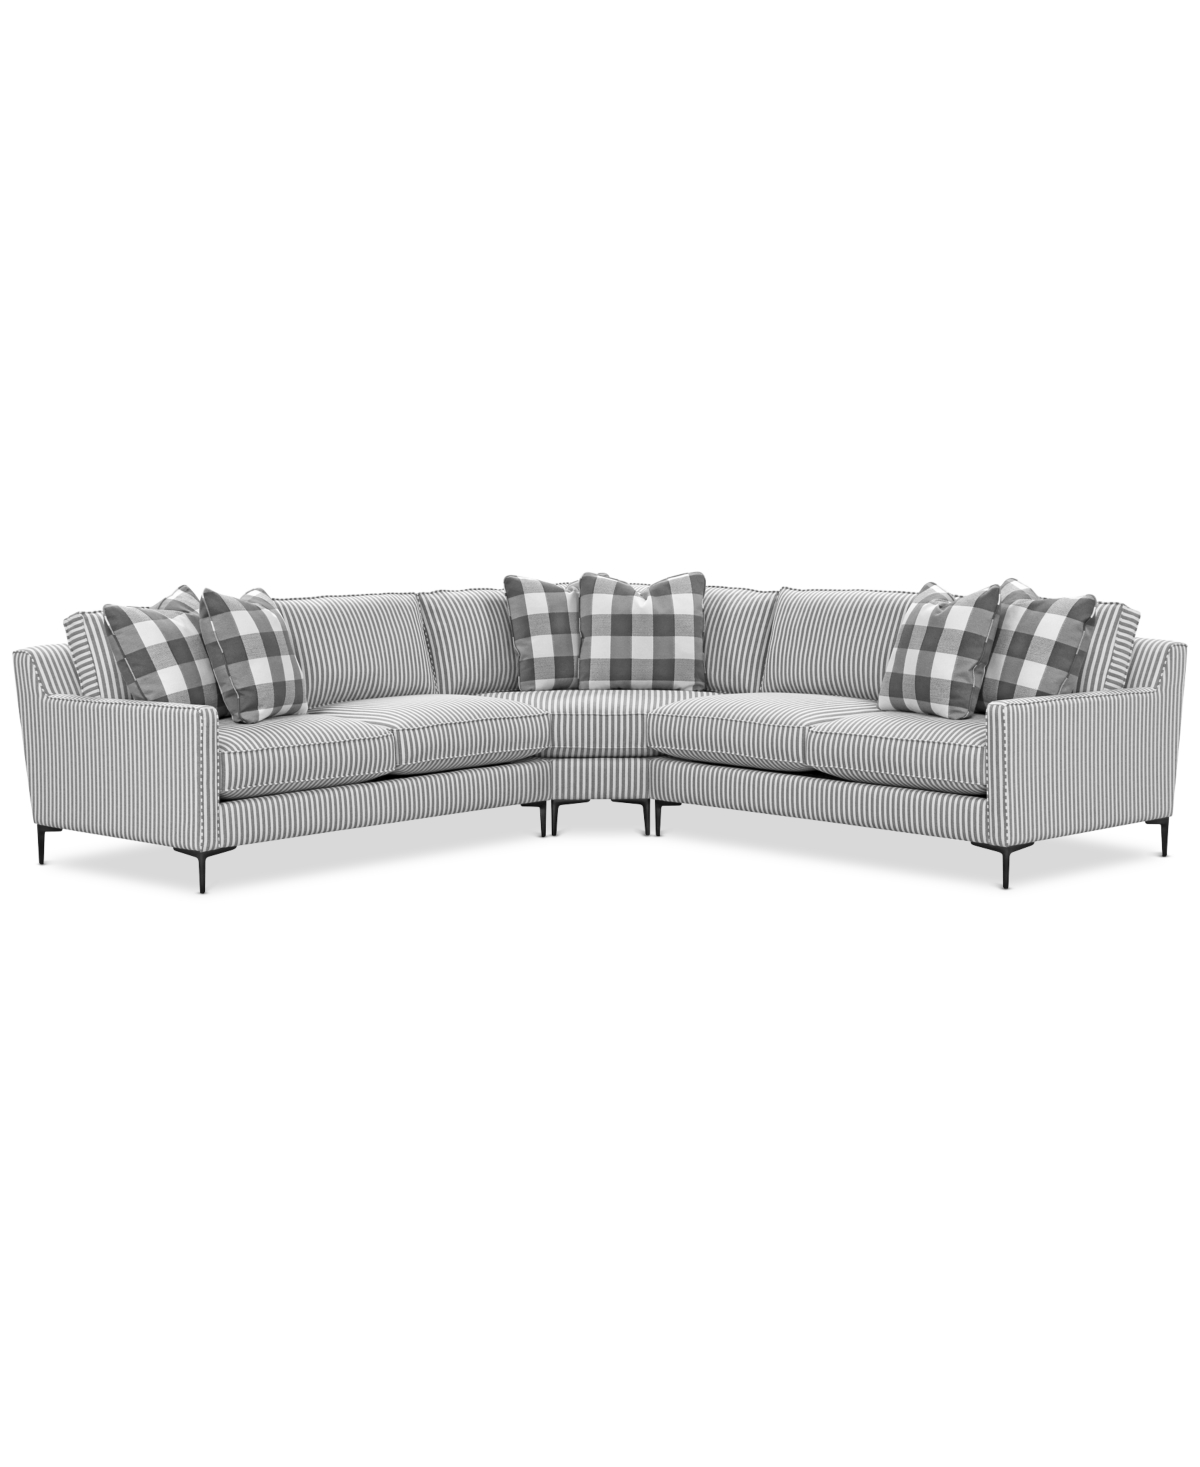 Furniture Closeout! Laylanna 119" 3-pc. Fabric Striped L-shape Sectional, Created For Macy's In Grey